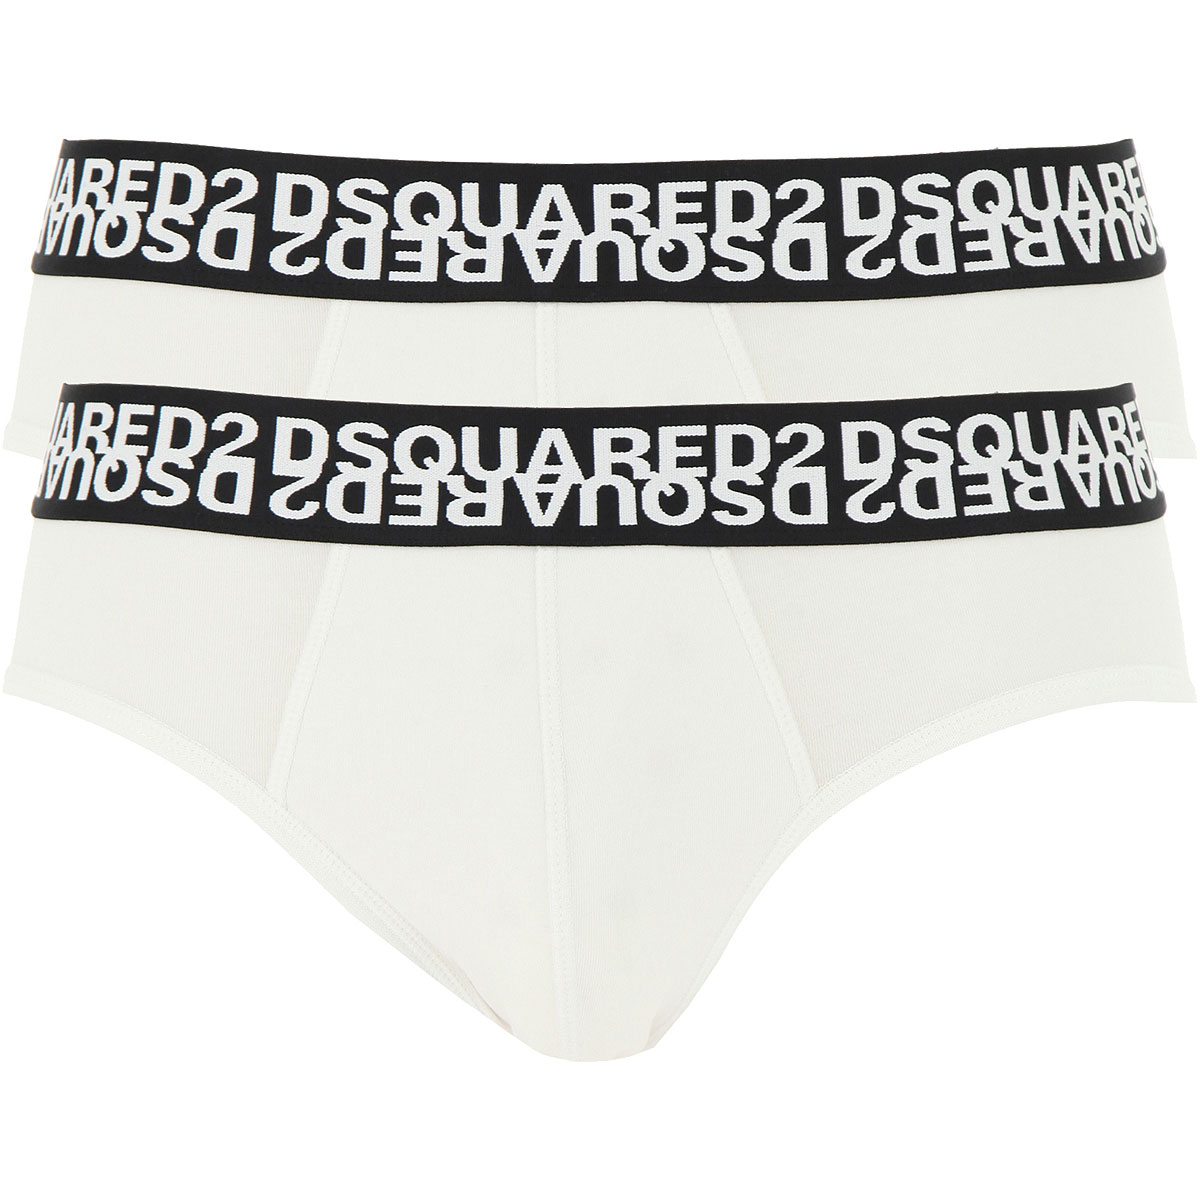 Mens Underwear Dsquared2, Style code: d9x612970-100-